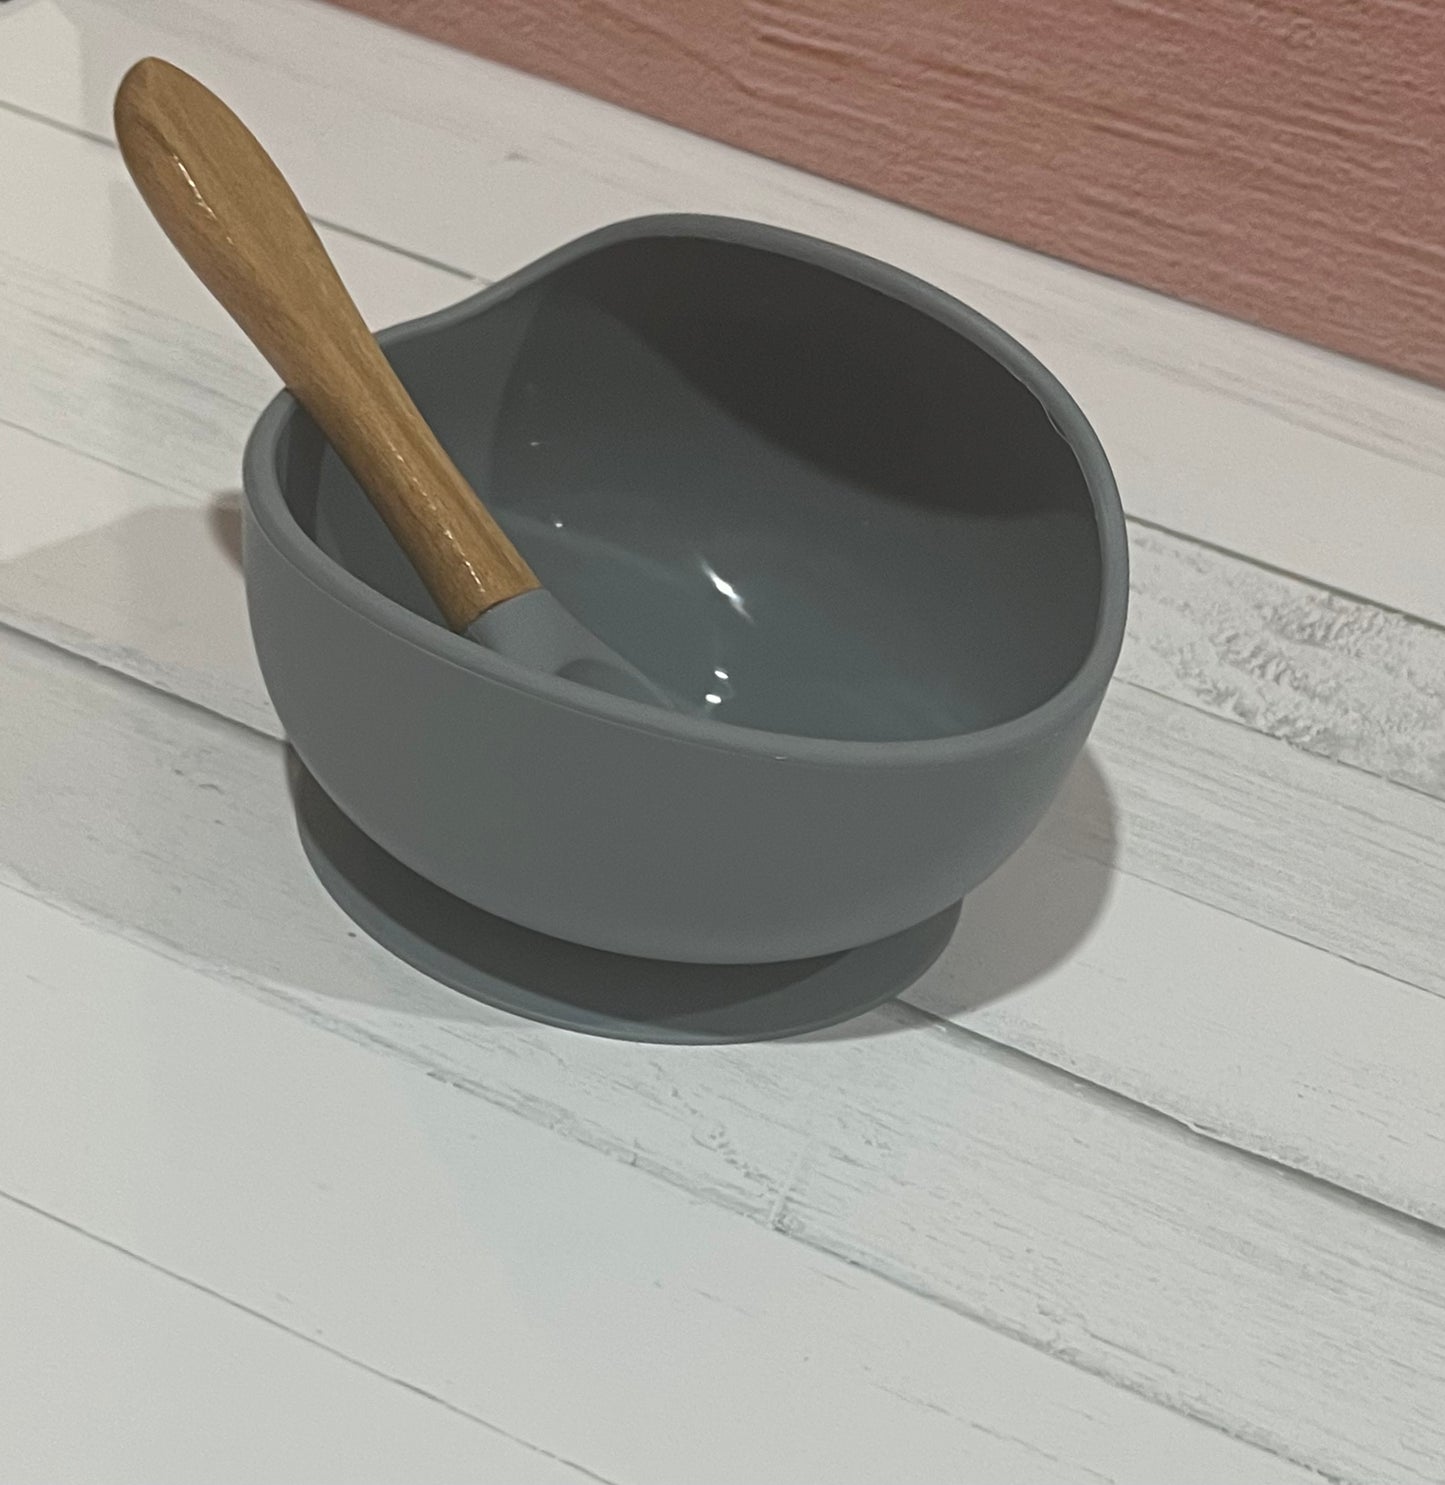 Silicone, suction bowl and spoon set